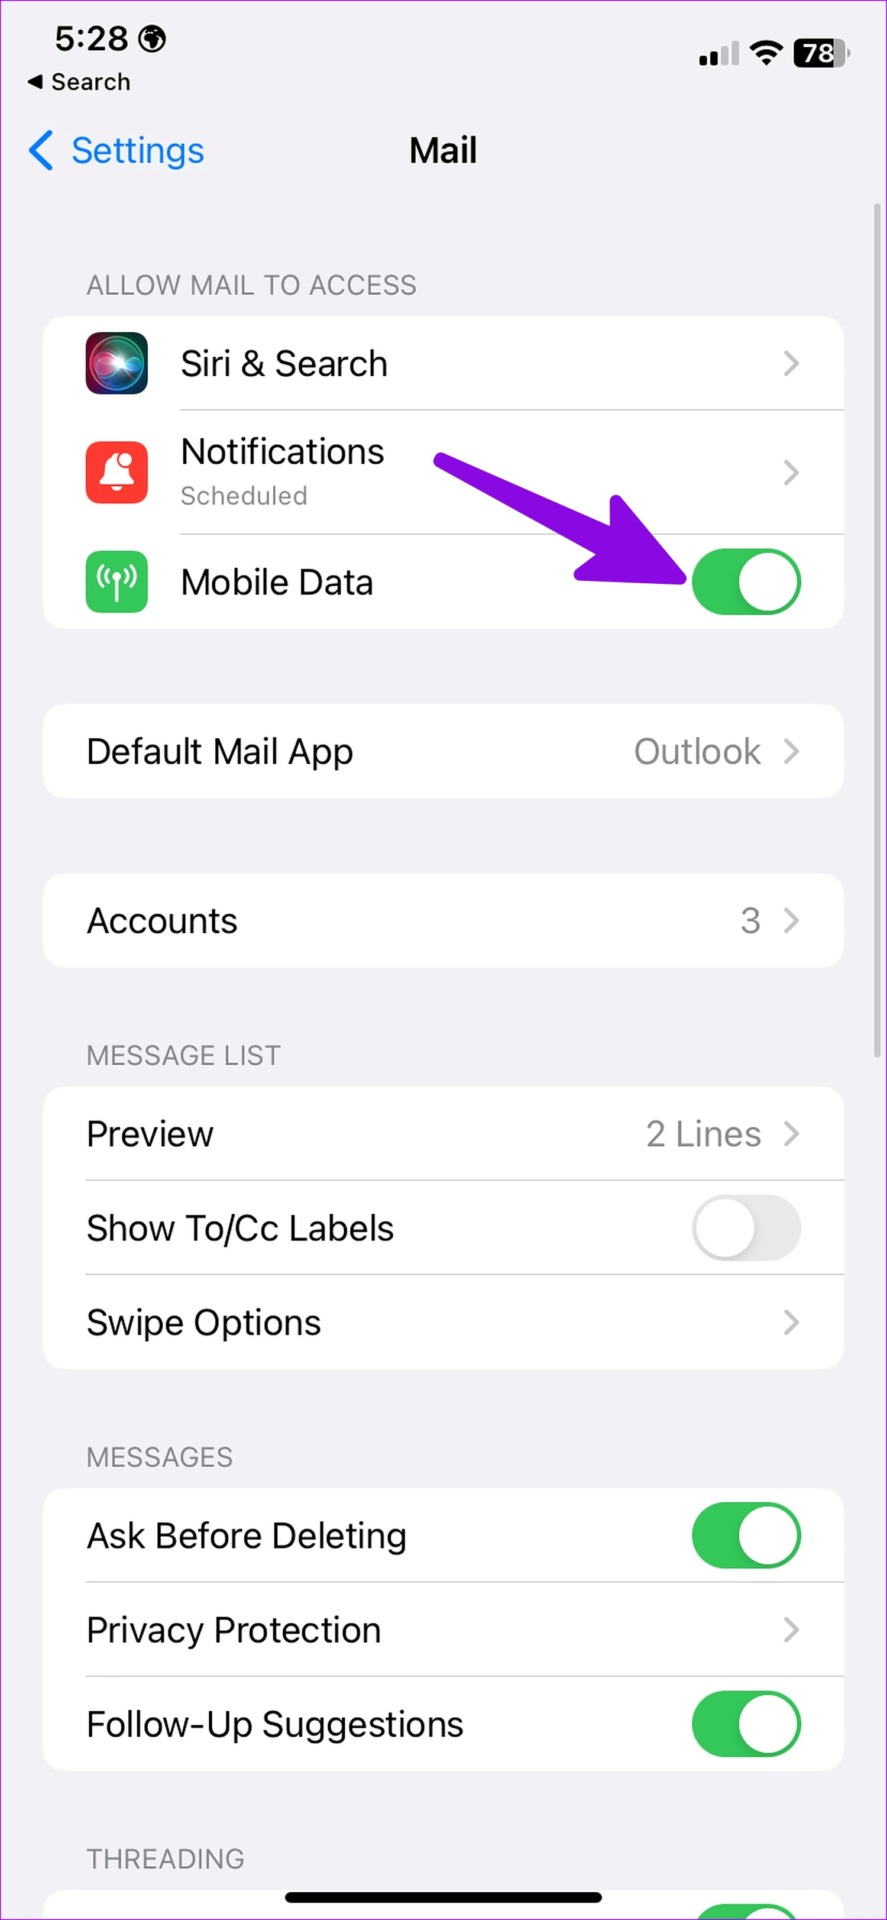 enable mobile data for mail